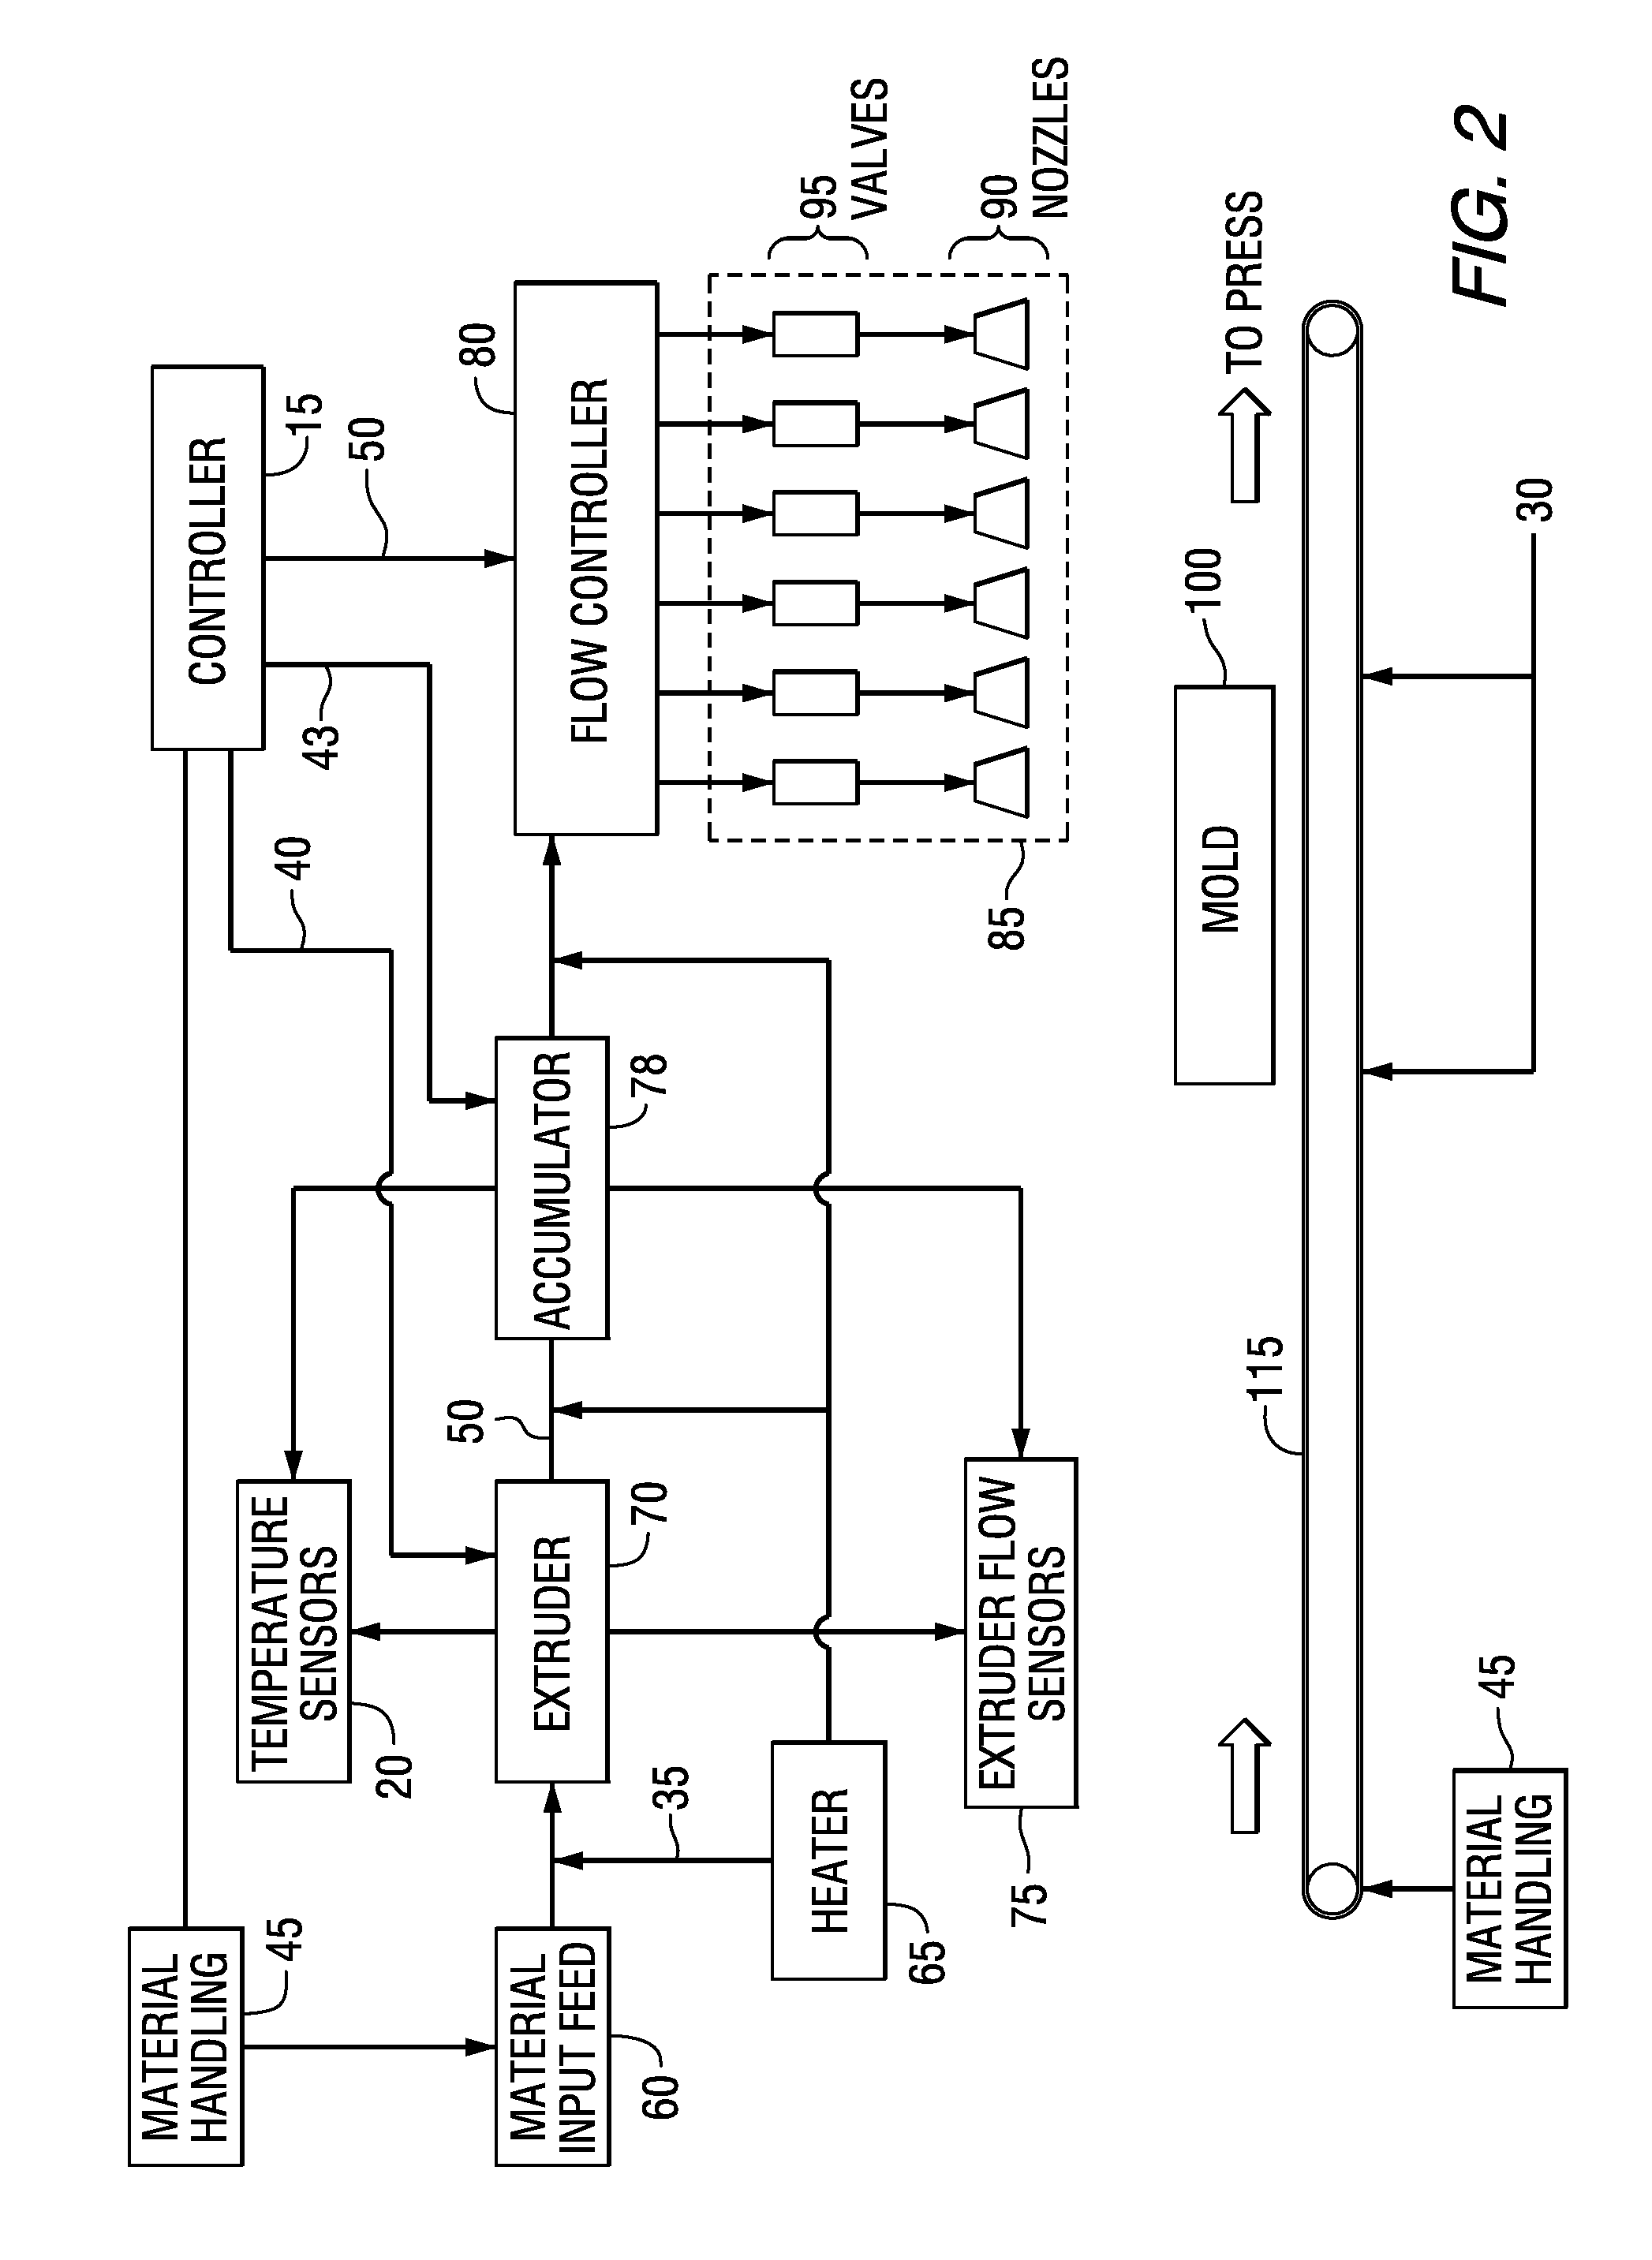 Apparatus and method for molding plastic materials